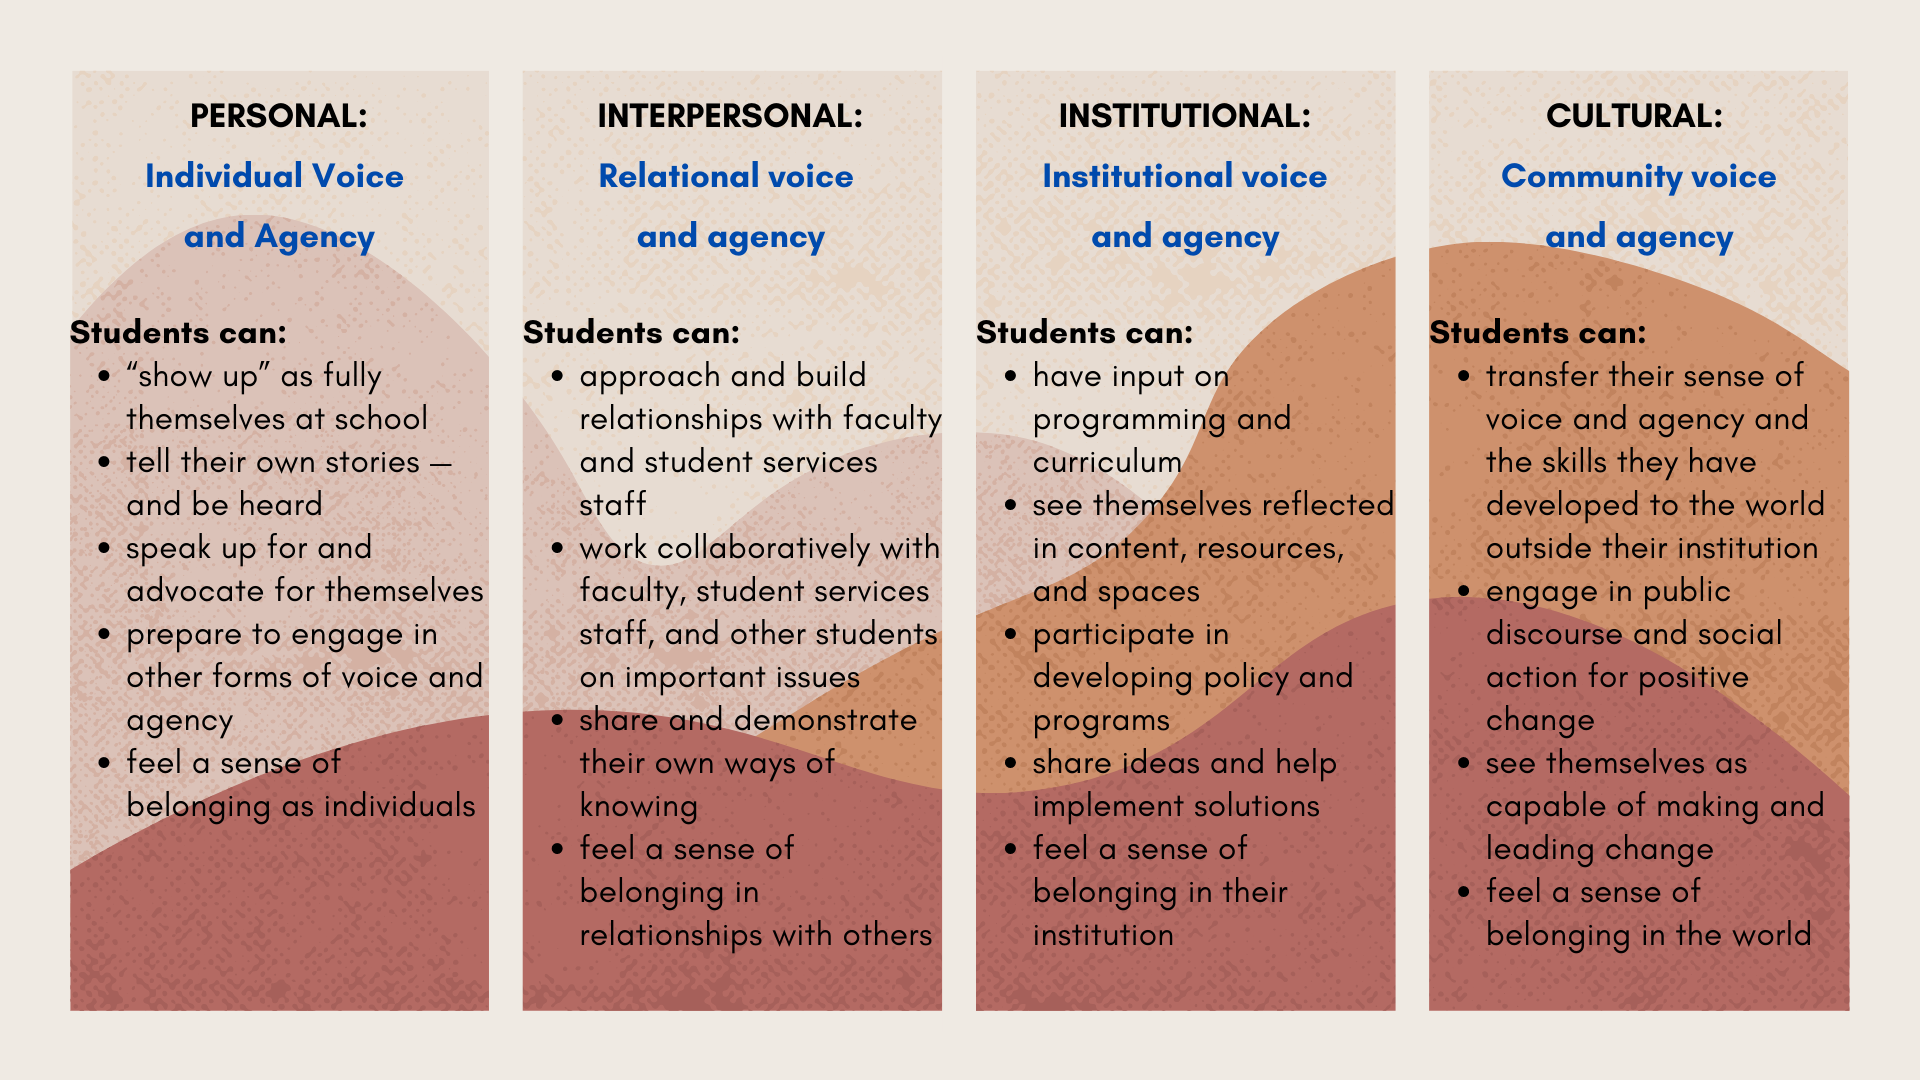 Four Layers of Student Voice and Agency 1. Personal: Individual voice and agency Students can “show up” as fully themselves at school tell their own stories — and be heard speak up for and advocate for themselves prepare to engage in other forms of voice and agency feel a sense of belonging as individuals 2. Interpersonal: Relational voice and agency Students can approach and build relationships with faculty and student services staff work collaboratively with faculty, student services staff, and other students on important issues collaborate with faculty or program leads to determine their own learning processes and preferences share and demonstrate their own ways of knowing feel a sense of belonging in relationships with others. 3. Institutional: Institutional voice and agency Students can have input on programming and curriculum see themselves reflected in content, resources, and physical spaces participate in developing policy and programs share ideas and help implement solutions to institutional problems collaborate with students, faculty, and staff to research social action and institutional change feel a sense of belonging in their institution 4. Cultural: Community voice and agency Students can transfer their sense of voice and agency and the skills they have developed to the world outside their institution engage in public discourse and social action for positive change see themselves as capable of making and leading change feel a sense of belonging in the world